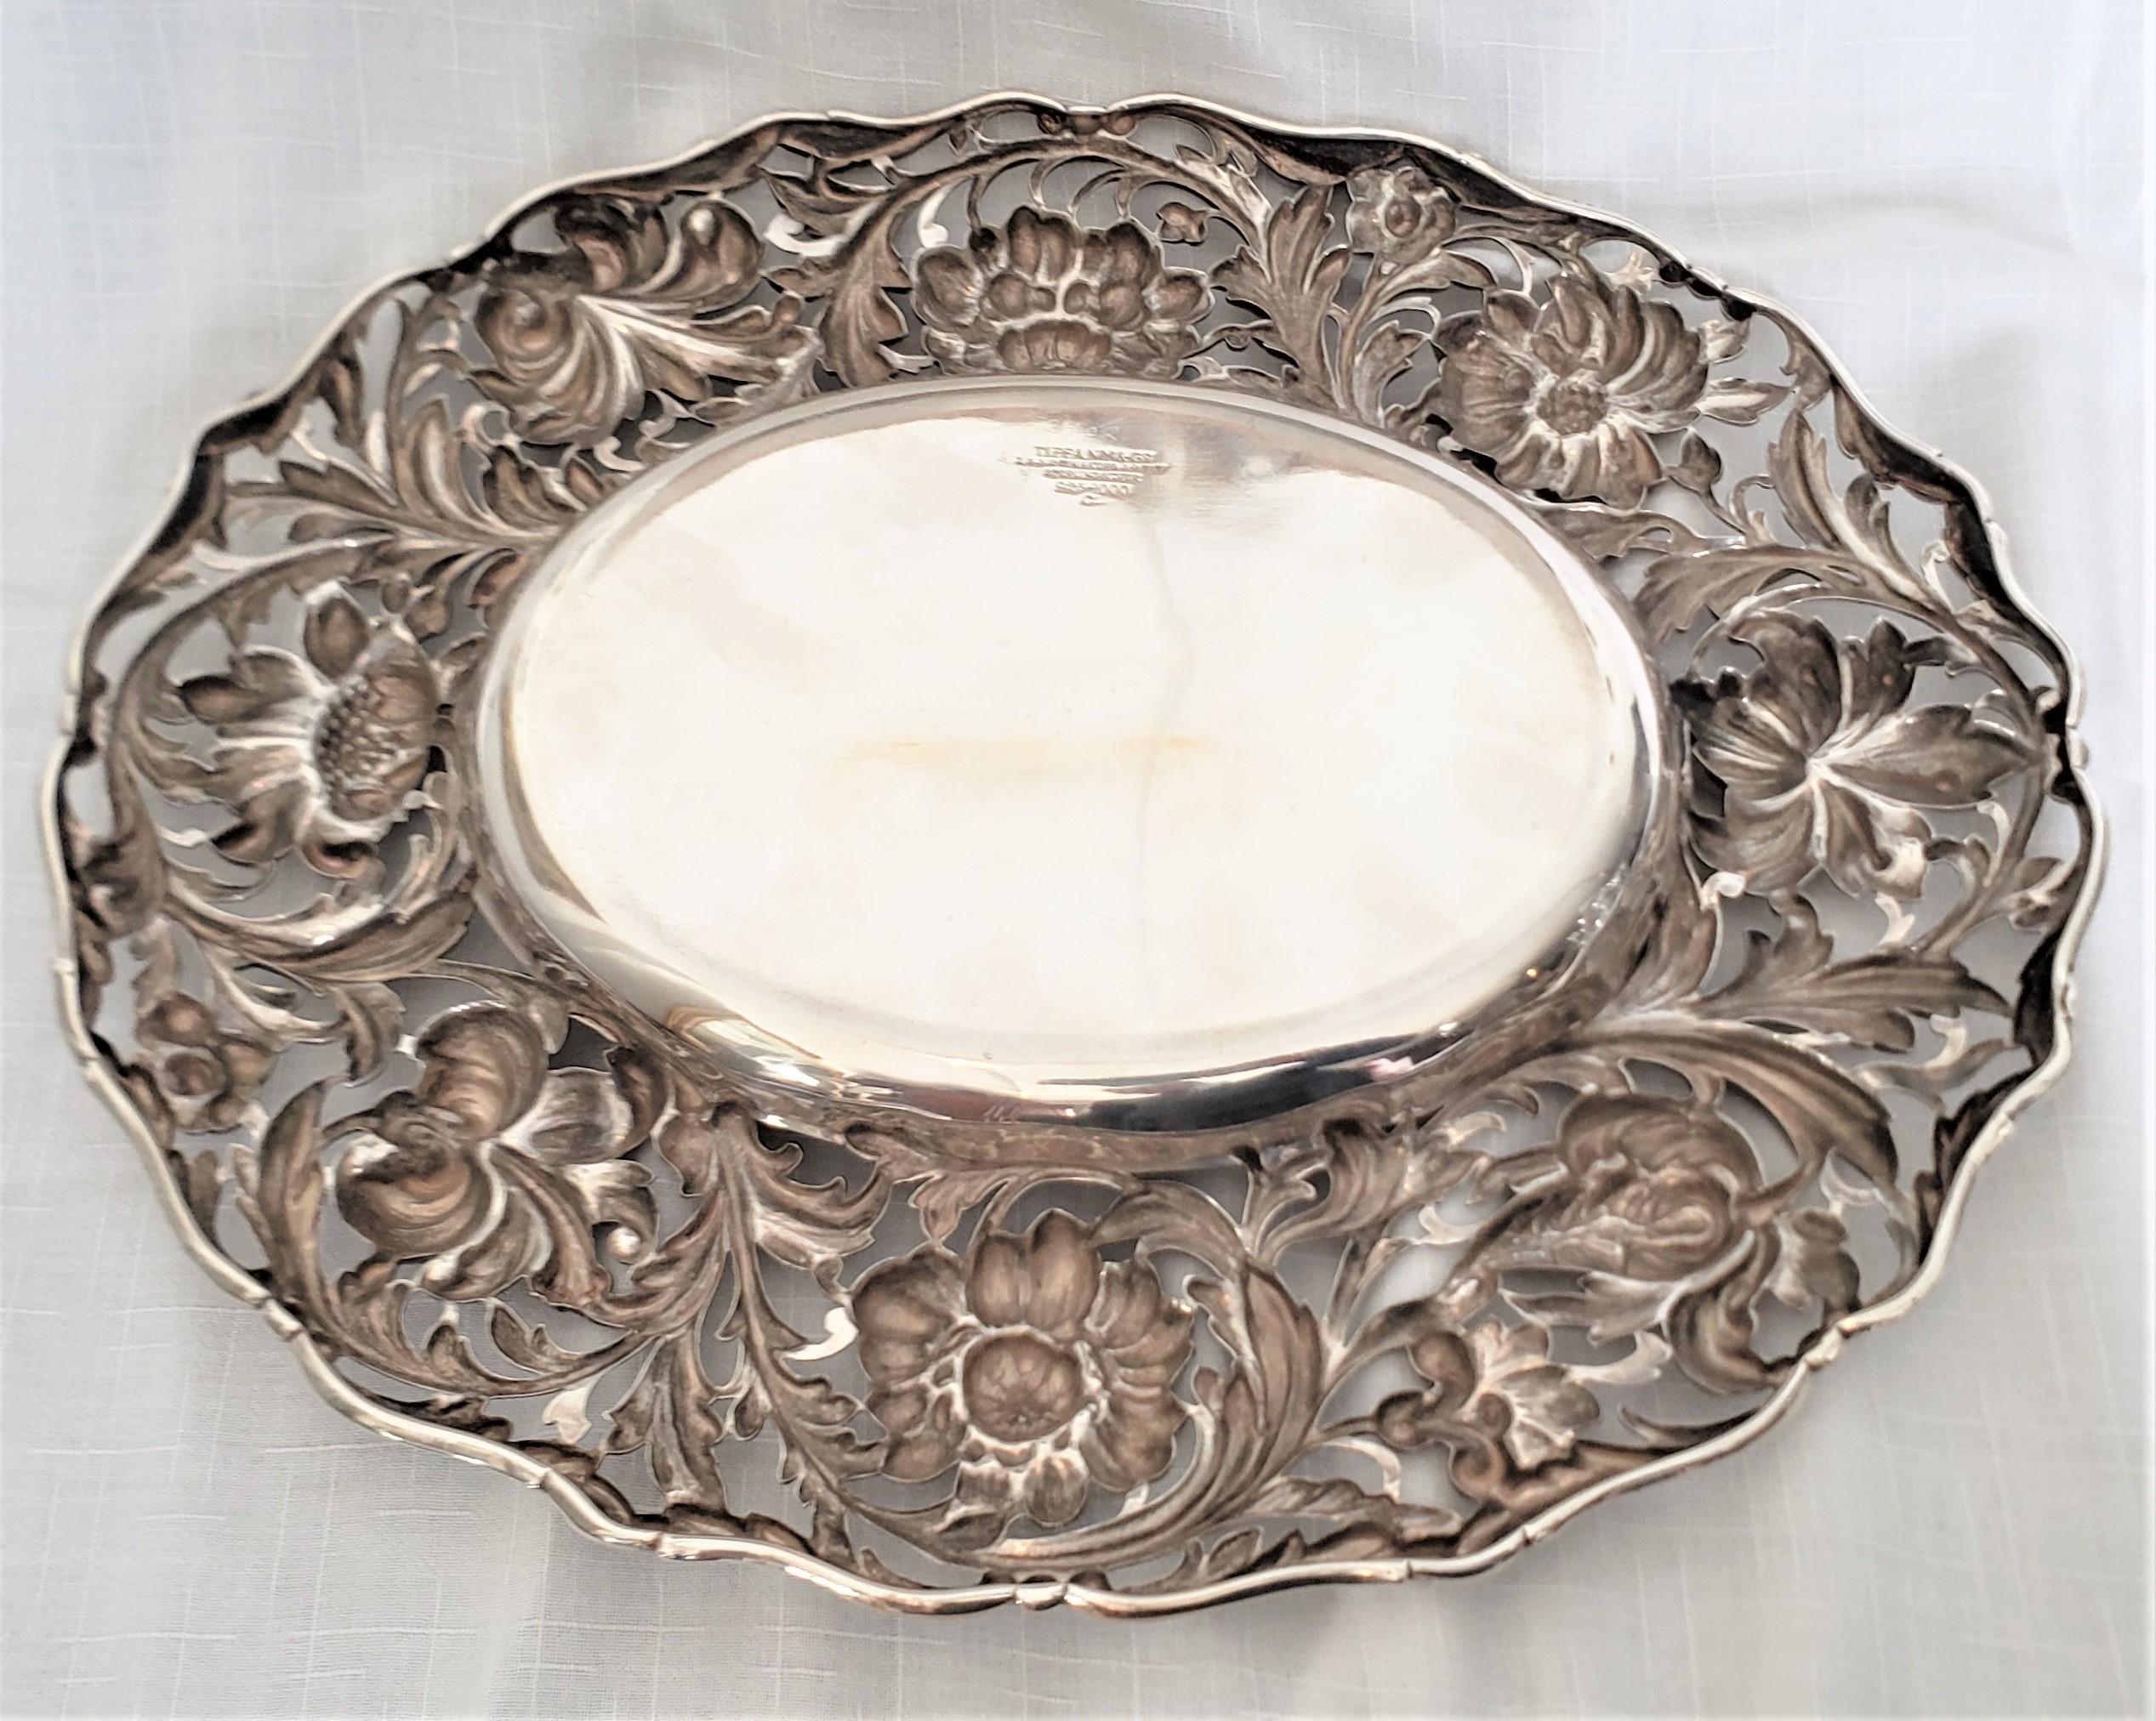 Hand-Crafted Antique Signed Tiffany & Co. Sterling Silver Serving Dish with Floral Decoration For Sale